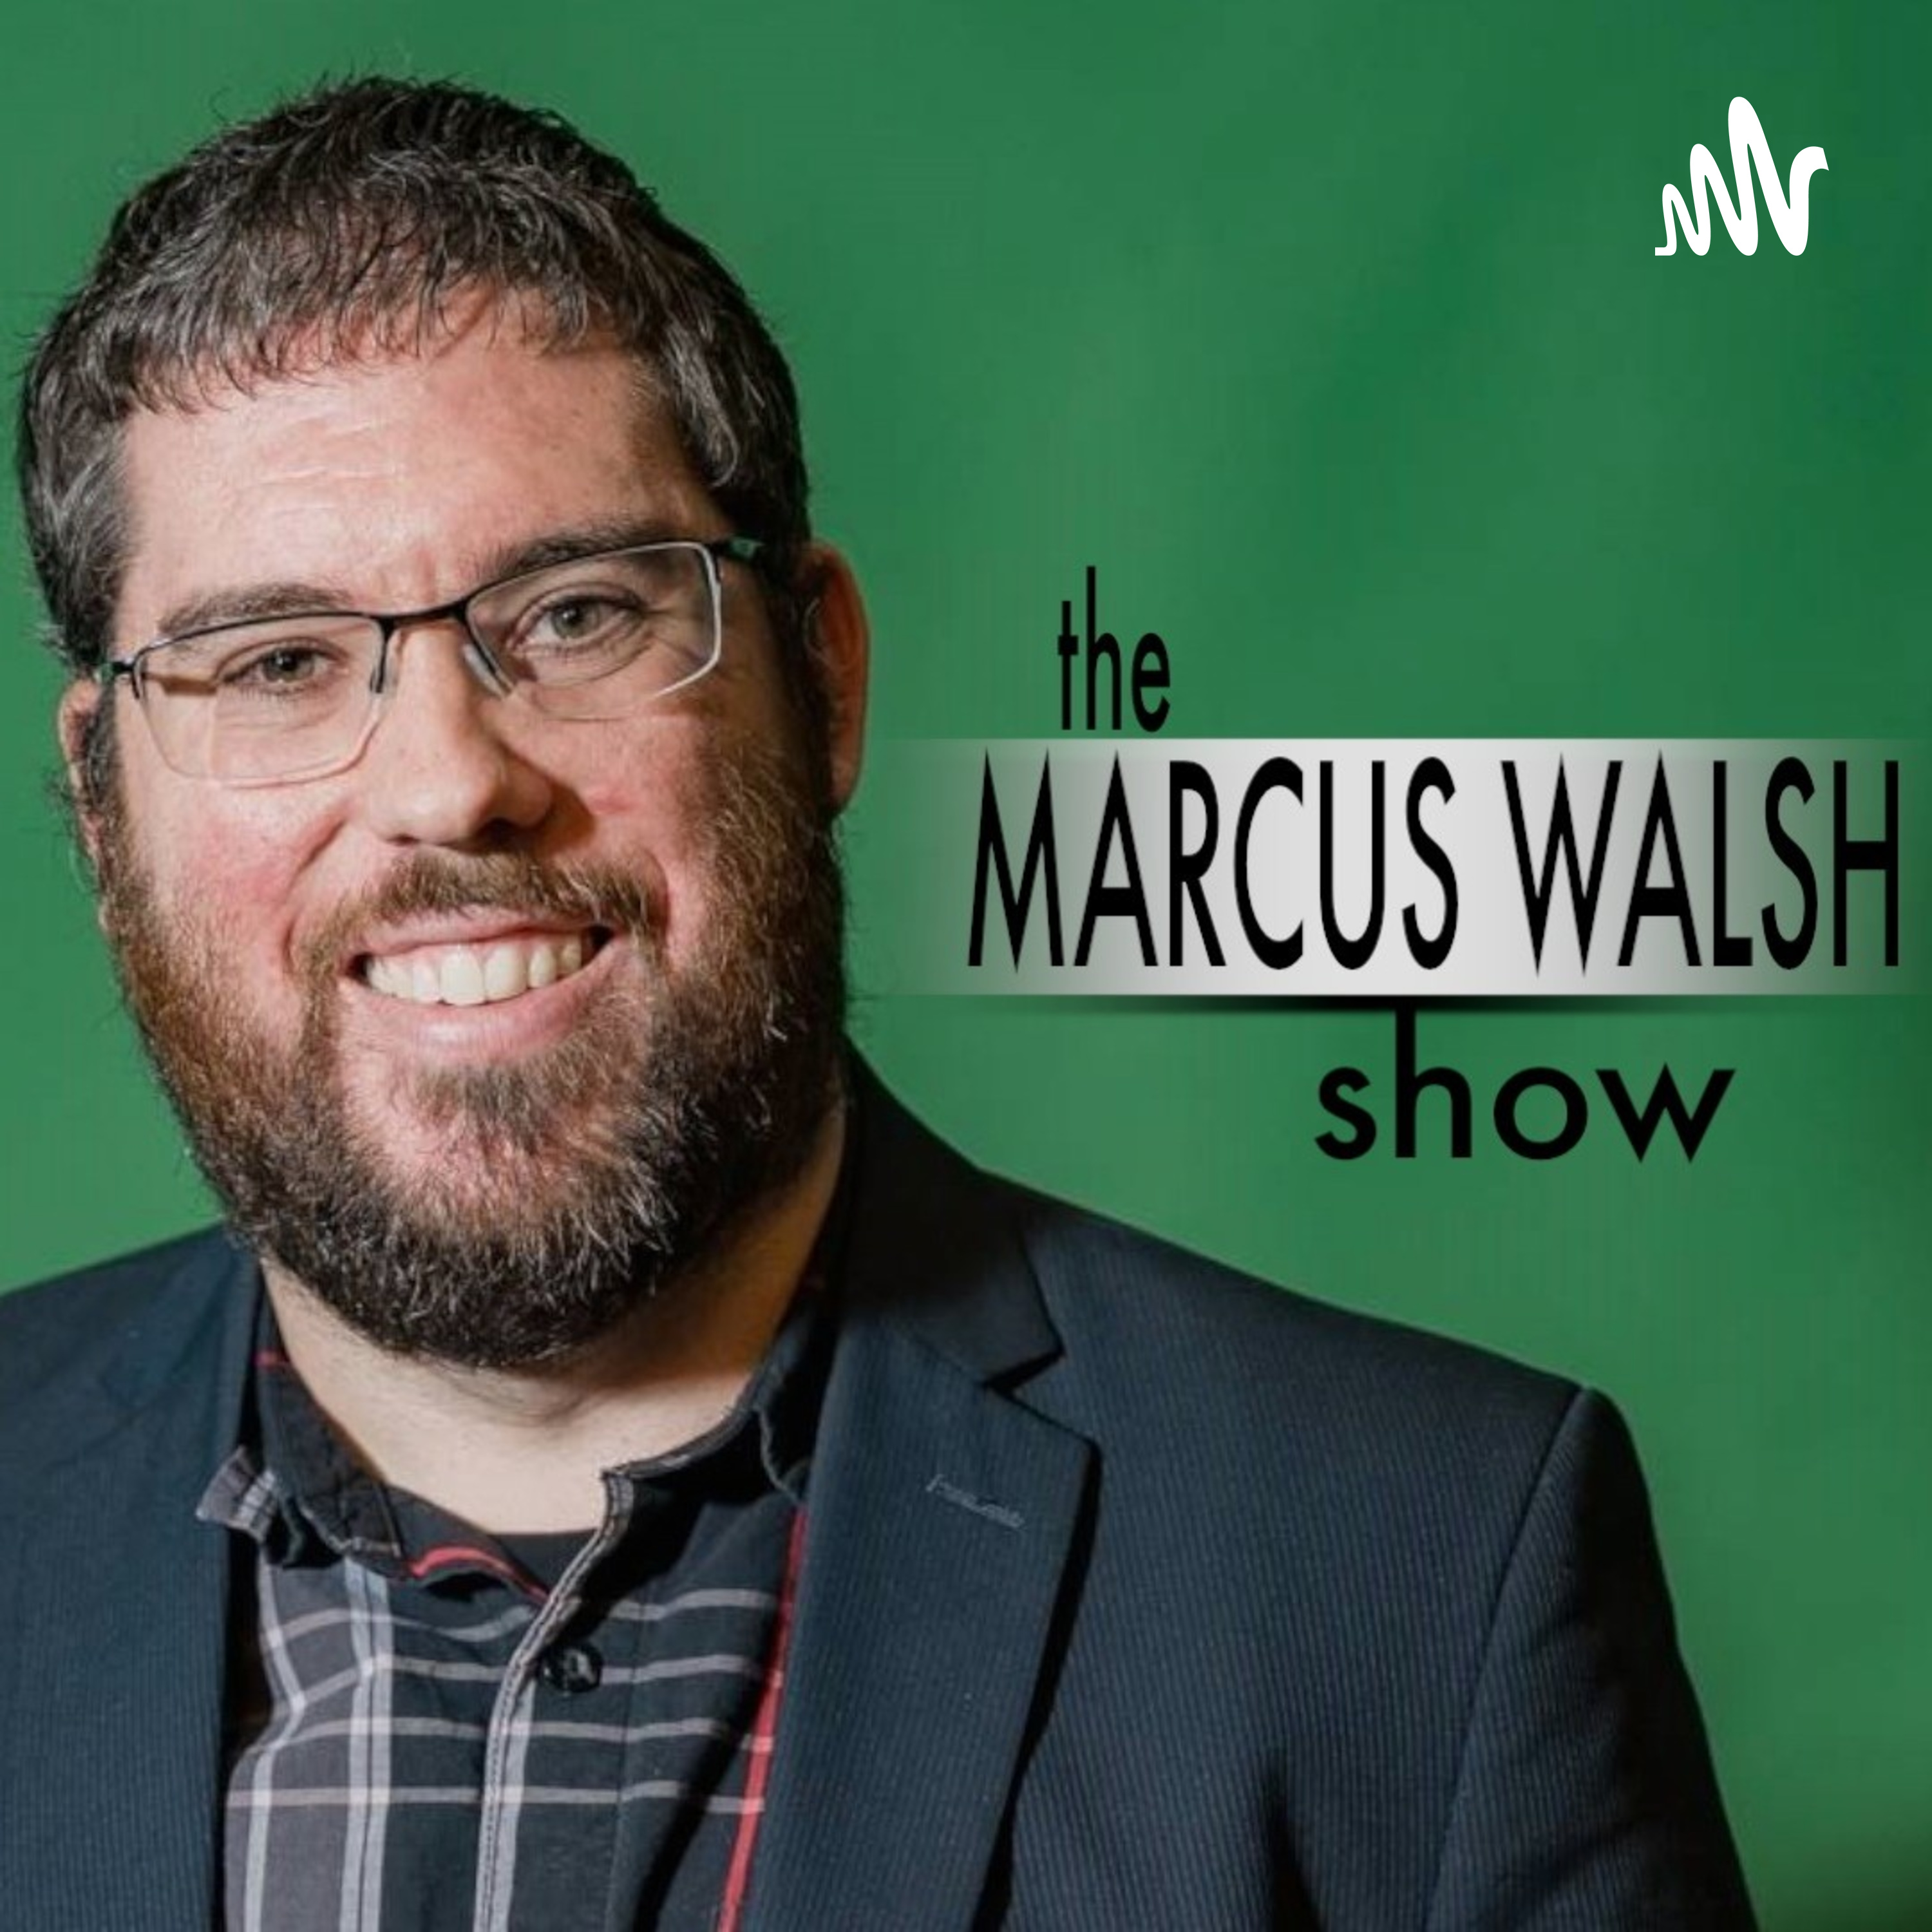 The Marcus Walsh Show